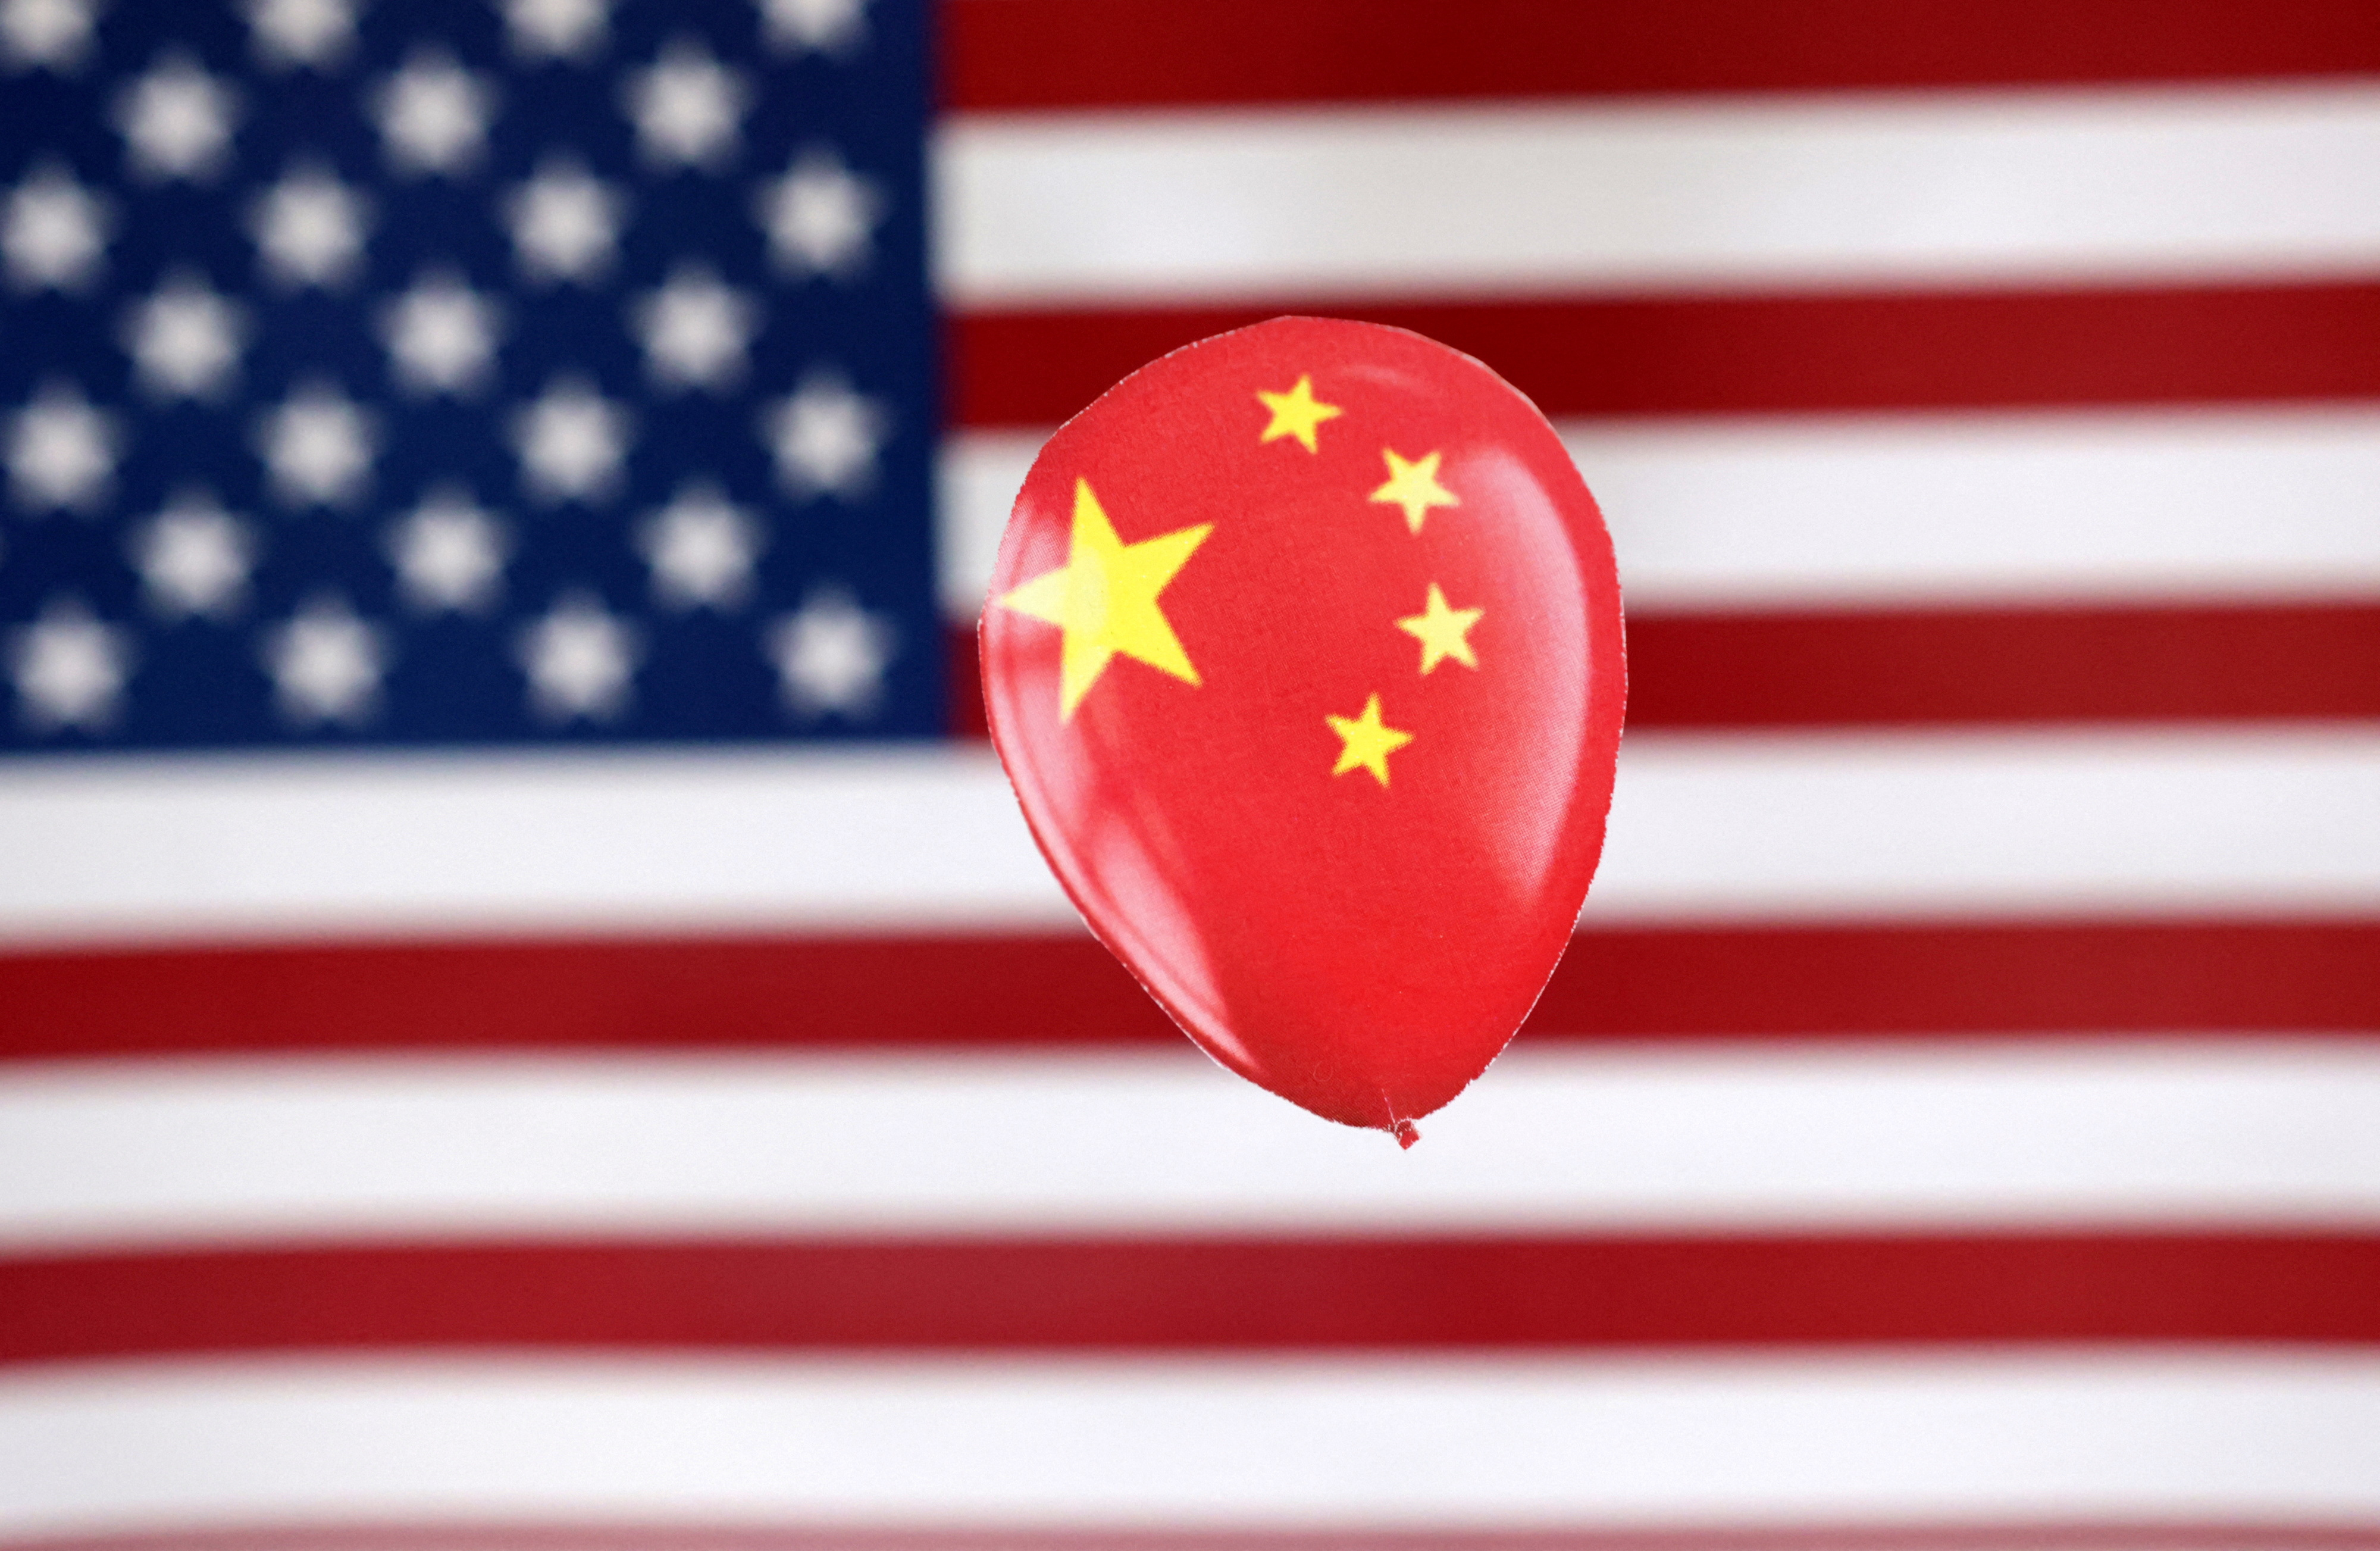 Illustration shows printed balloon with Chinese flag and U.S. flag